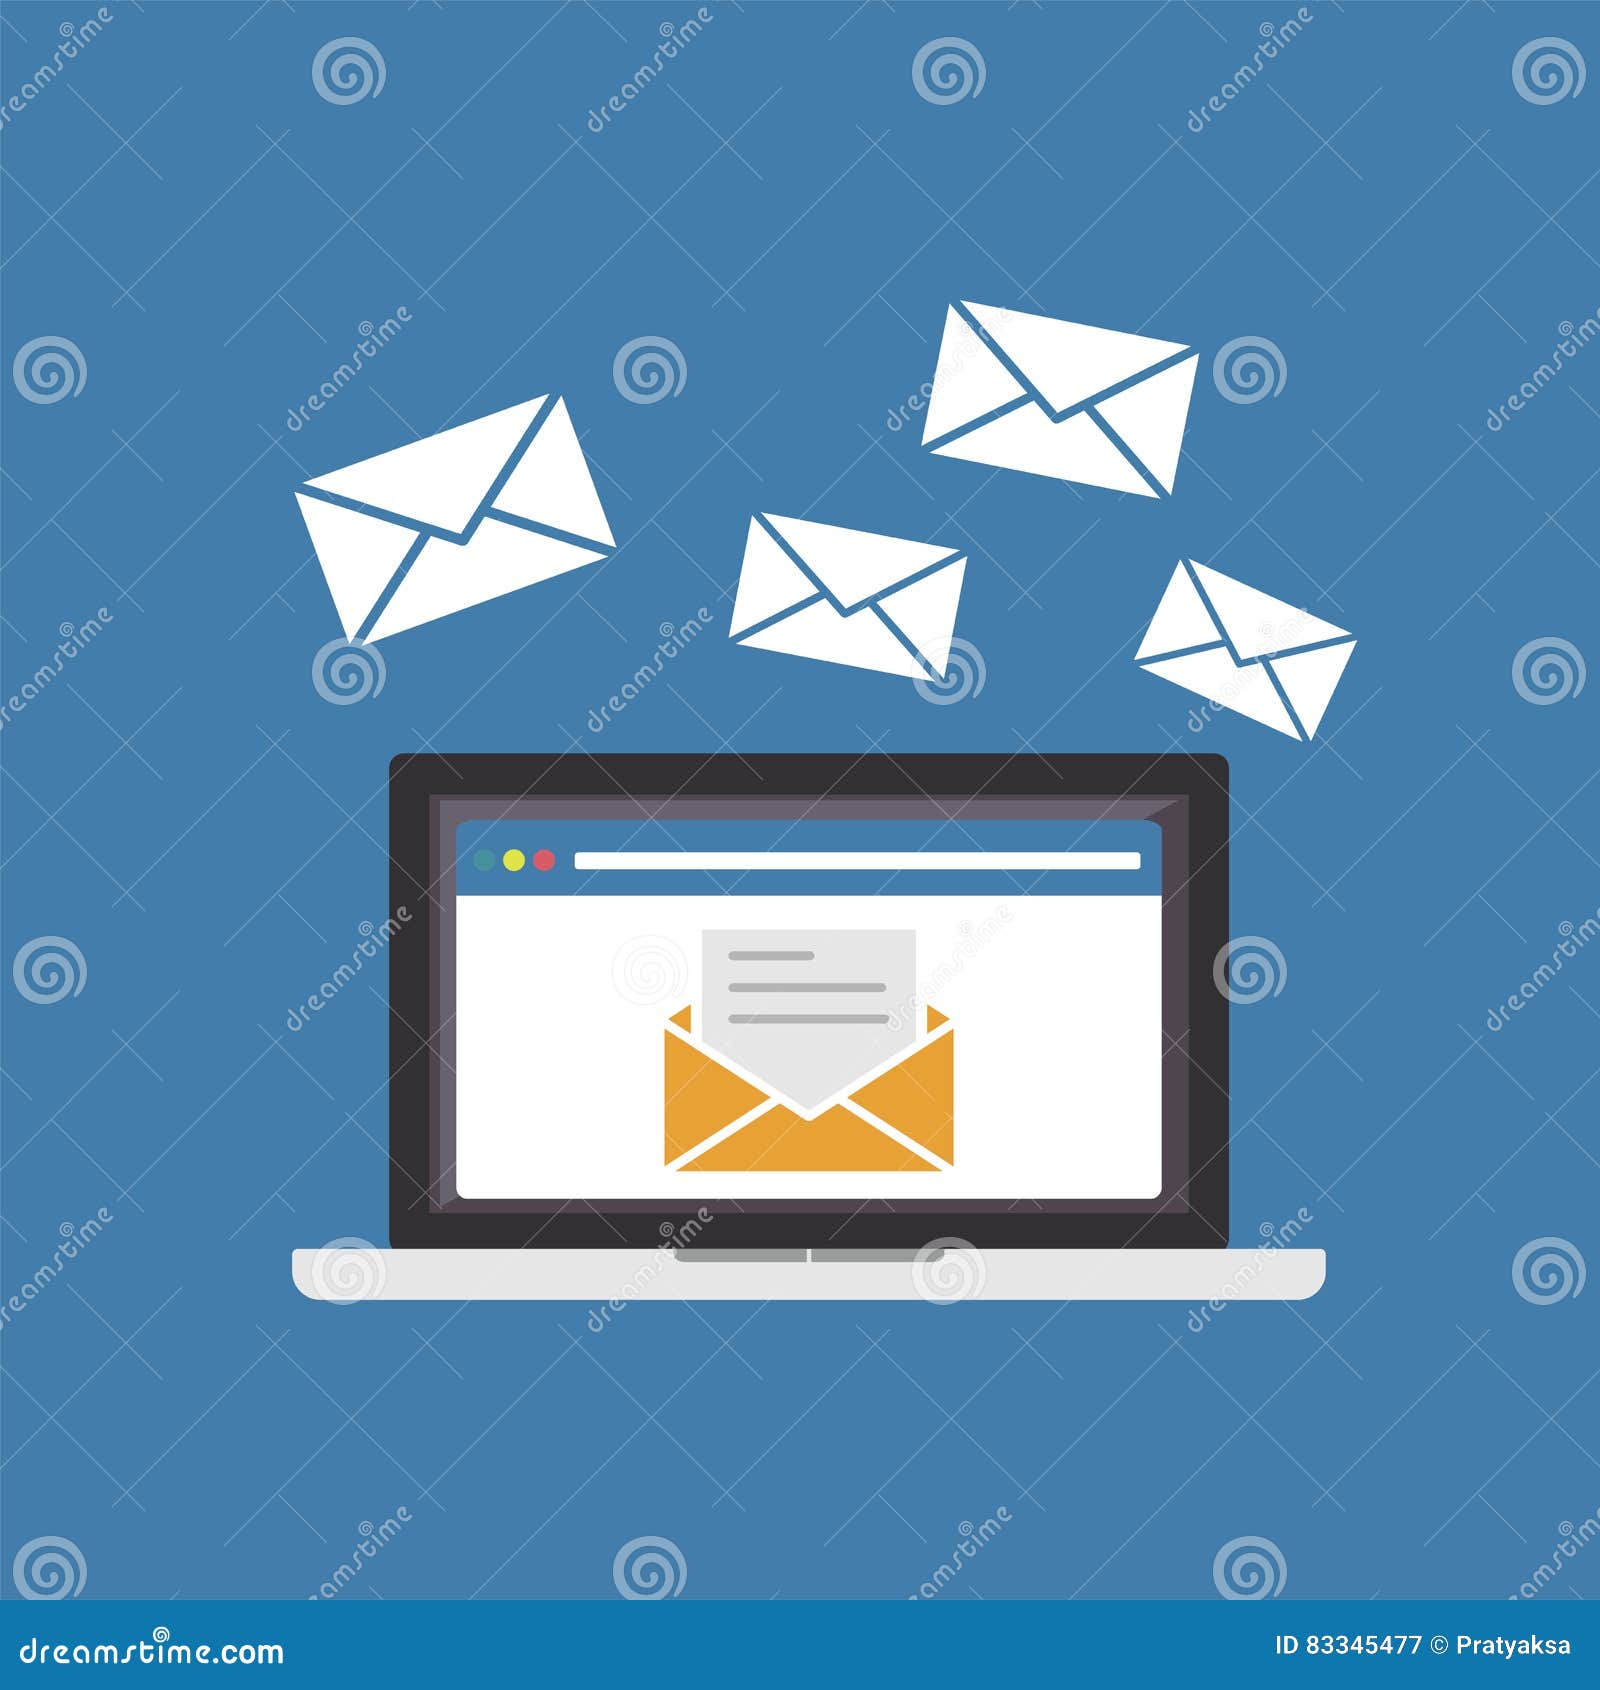 sending or receiving email. email marketing